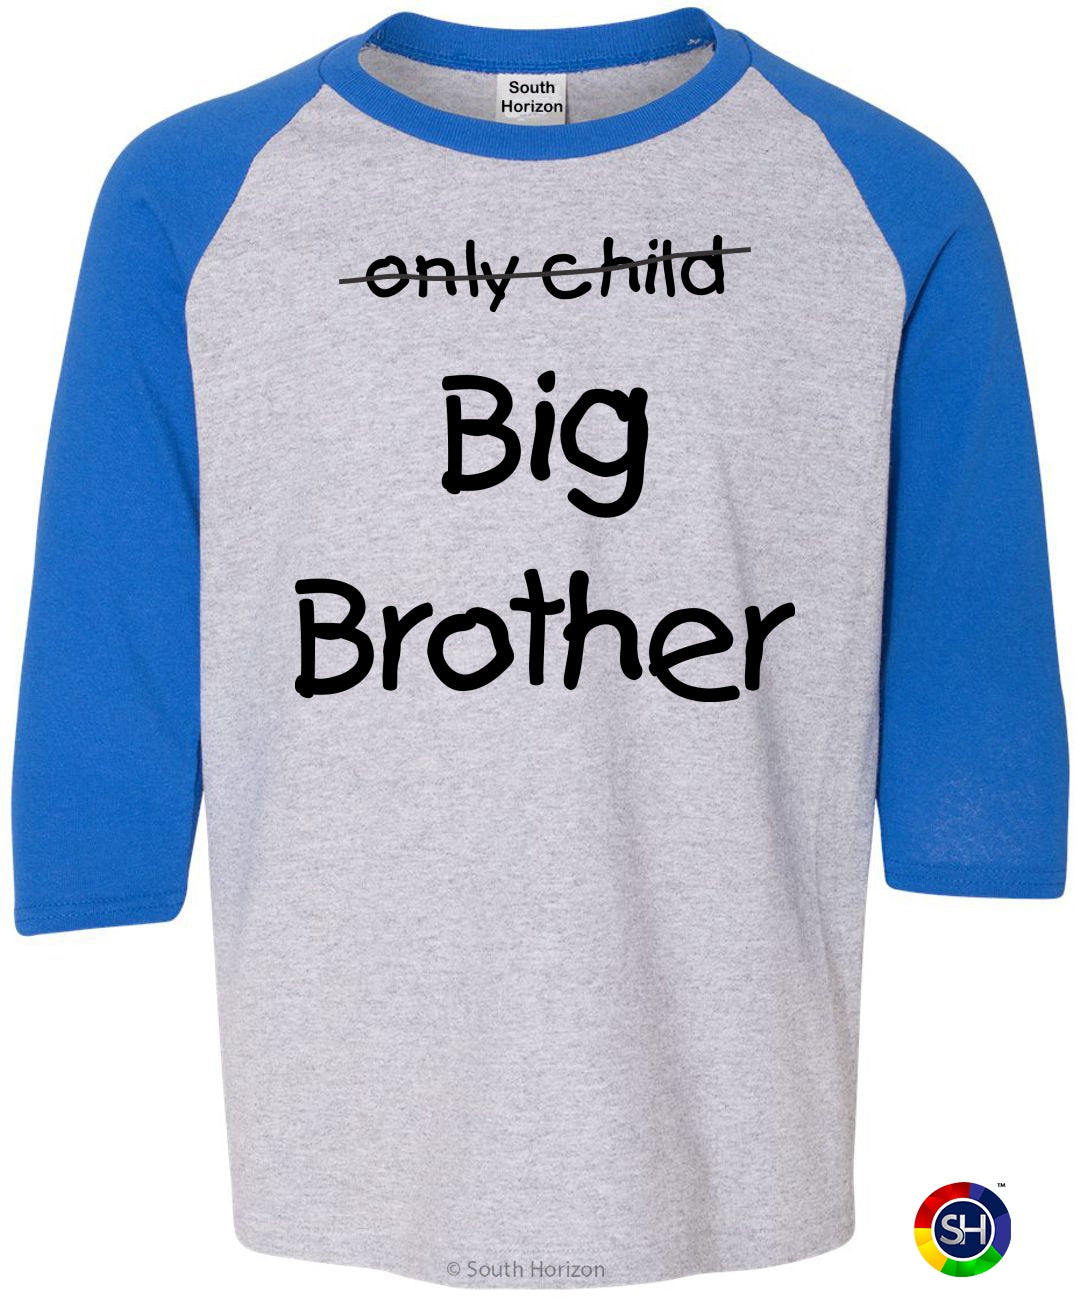 Only Child BIG BROTHER on Youth Baseball Shirt (#965-212)